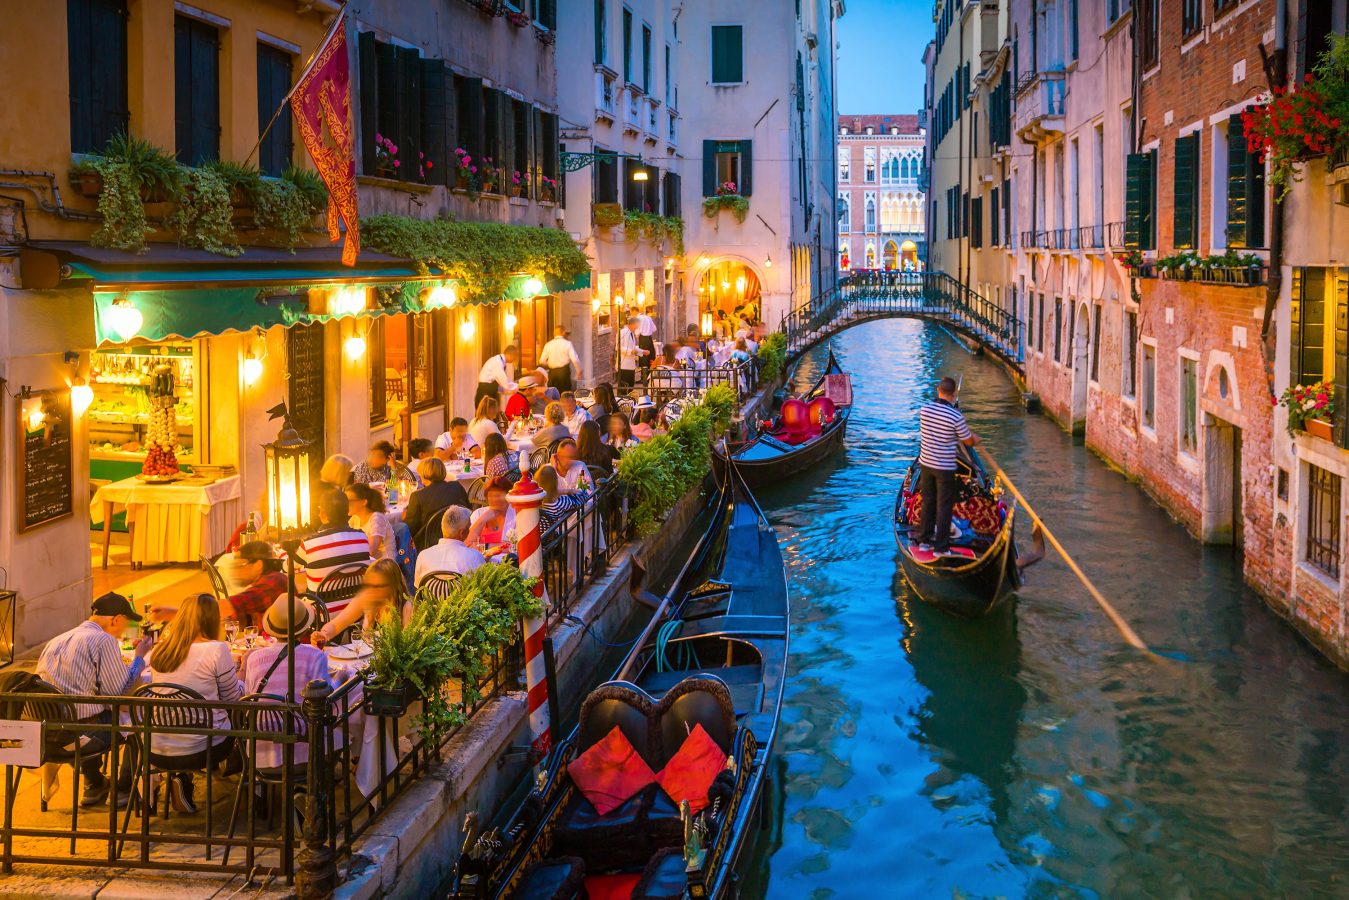 View of canal in Venice Italy at night. Italy's shoulder seasons are from March to April and from September to October.